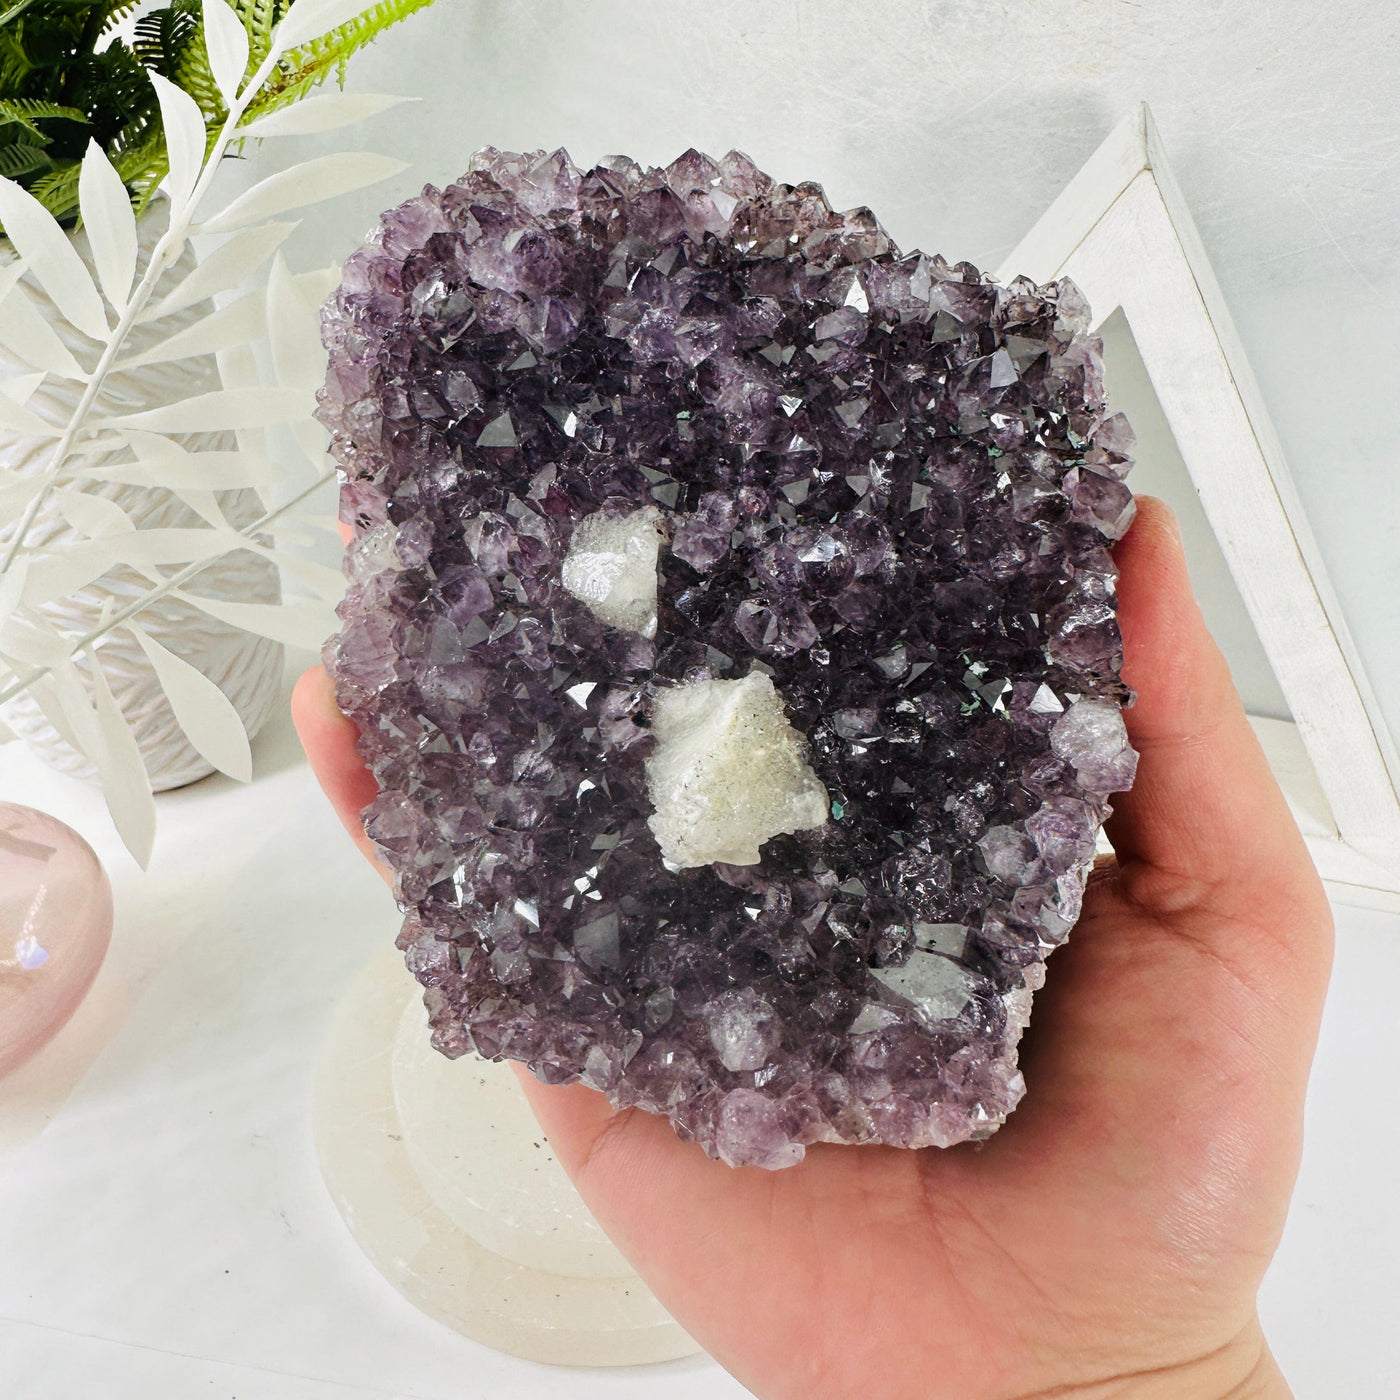 Amethyst Crystal Cluster - amethyst rough stone in hand for size reference